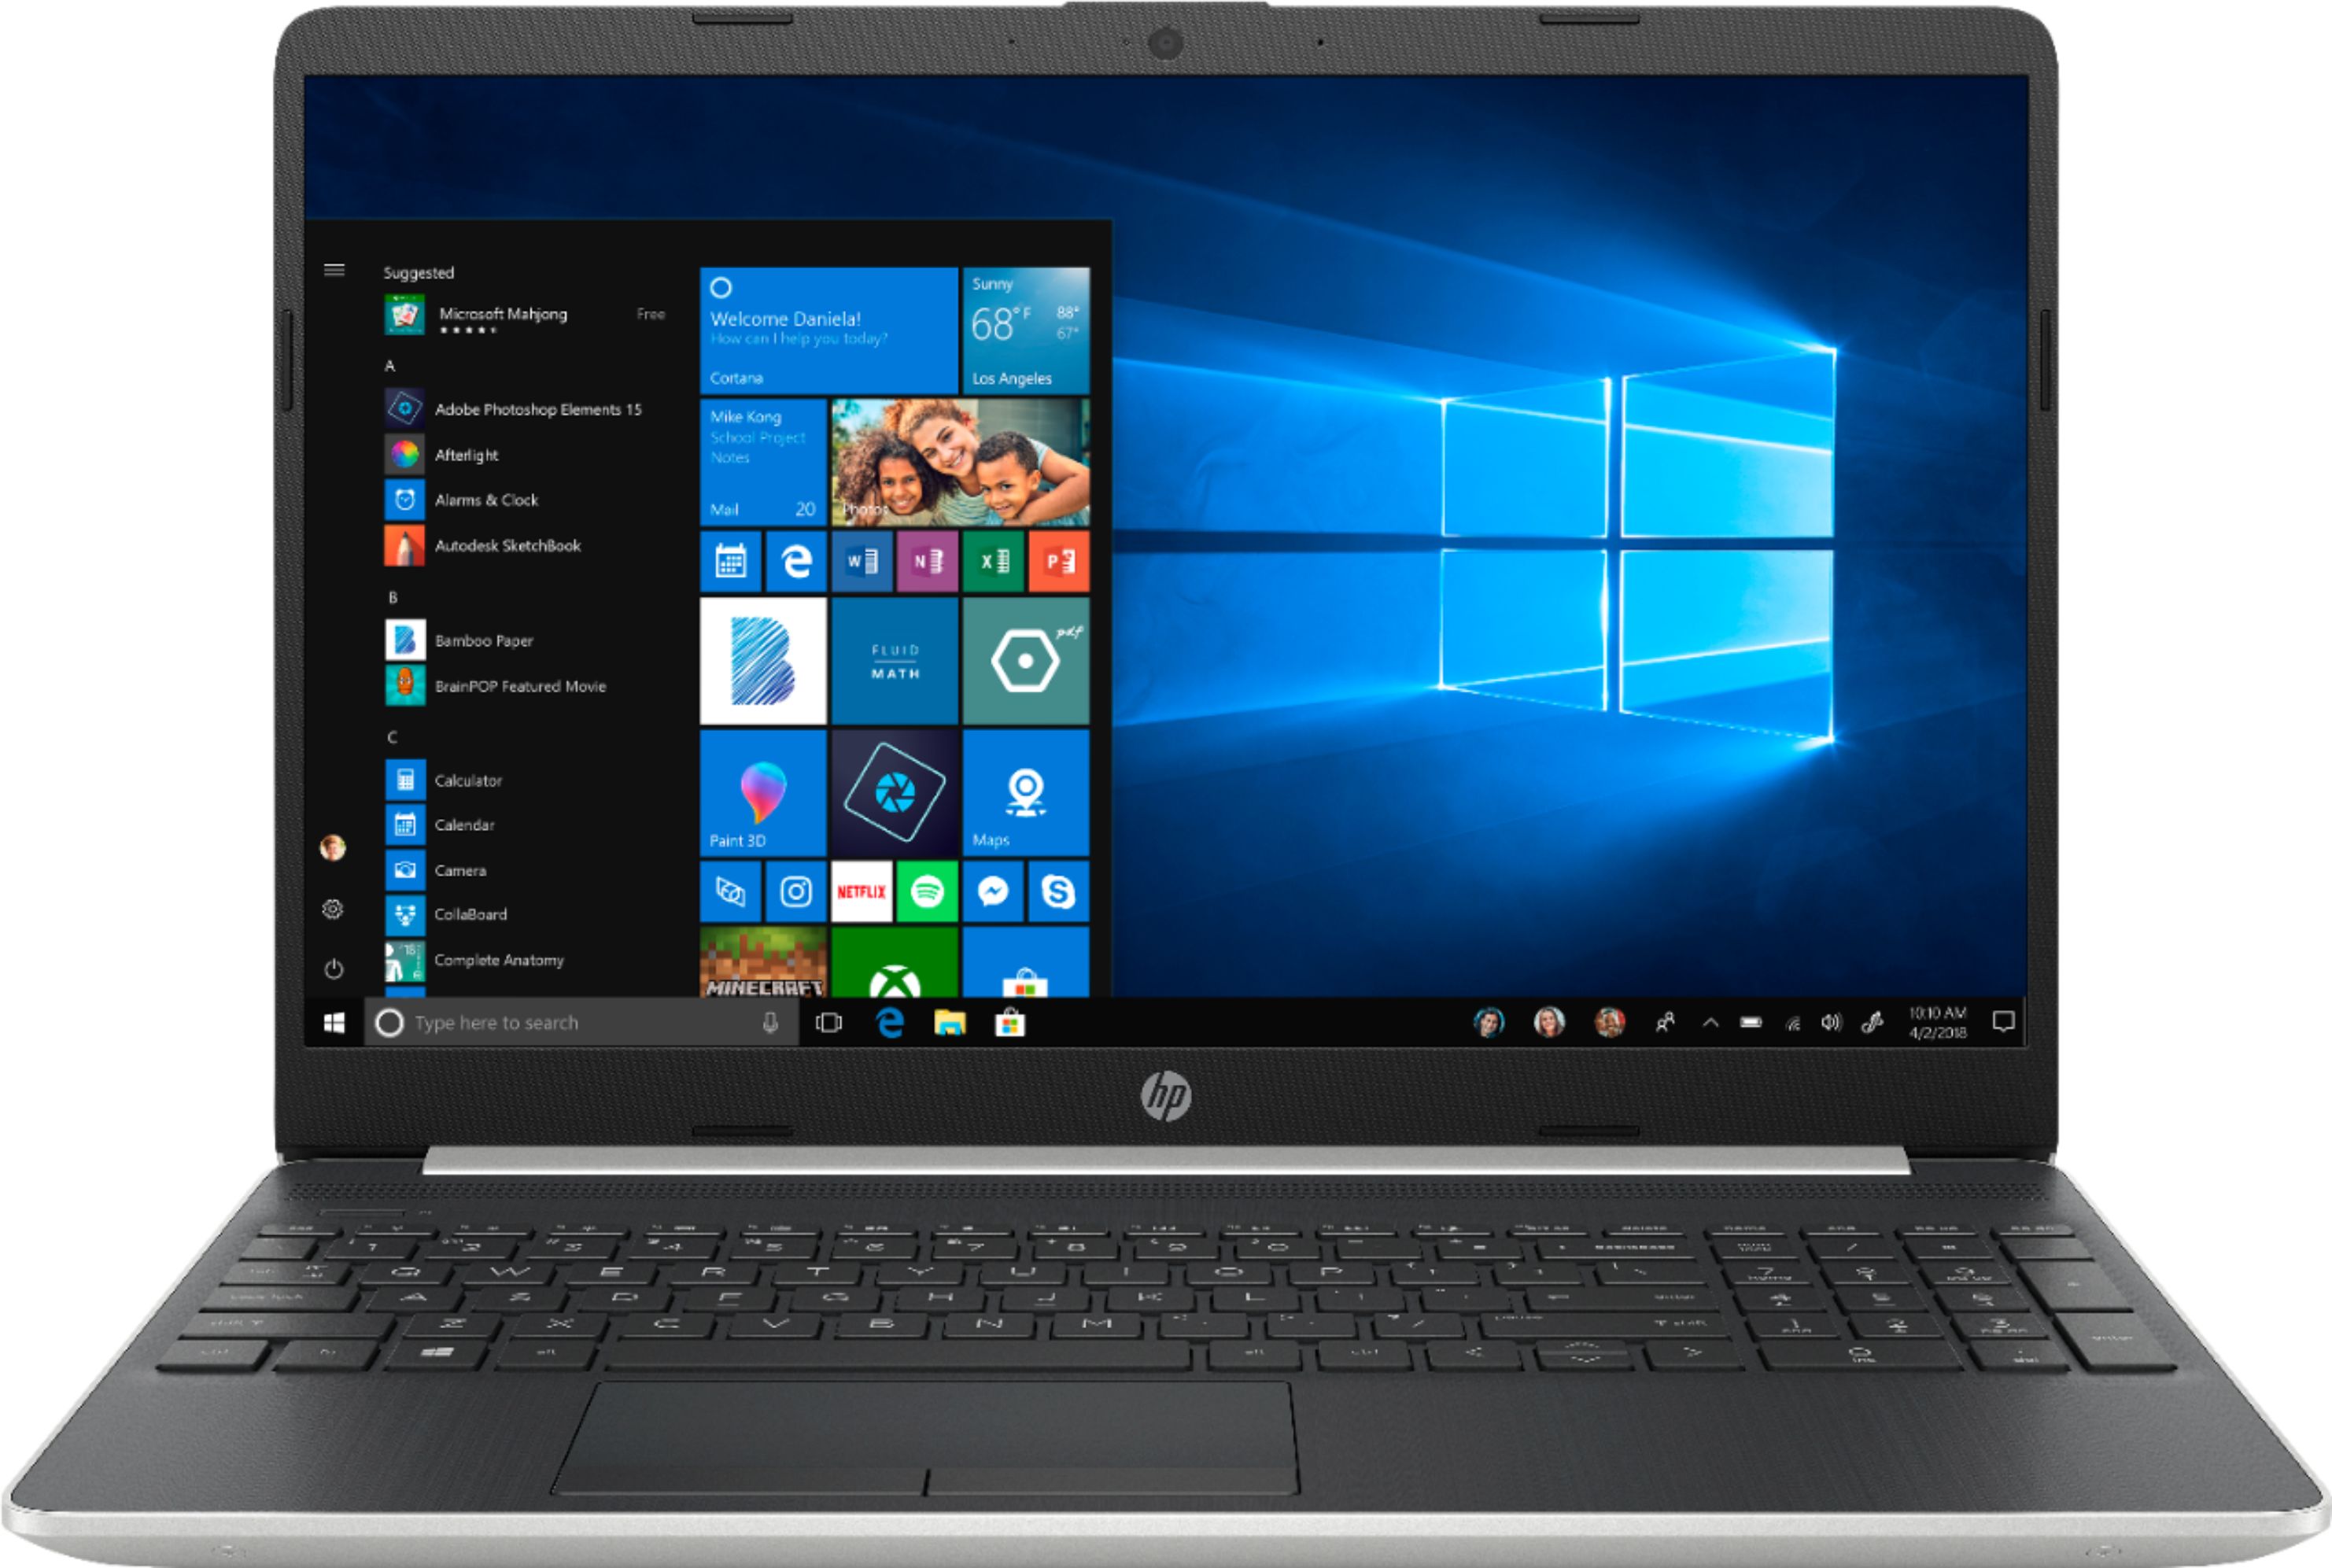 HP - 15.6" Touch-Screen Laptop - Intel Core i5 - 8GB Memory - 128GB Solid State Drive - Ash Silver Keyboard Frame, Natural Silver